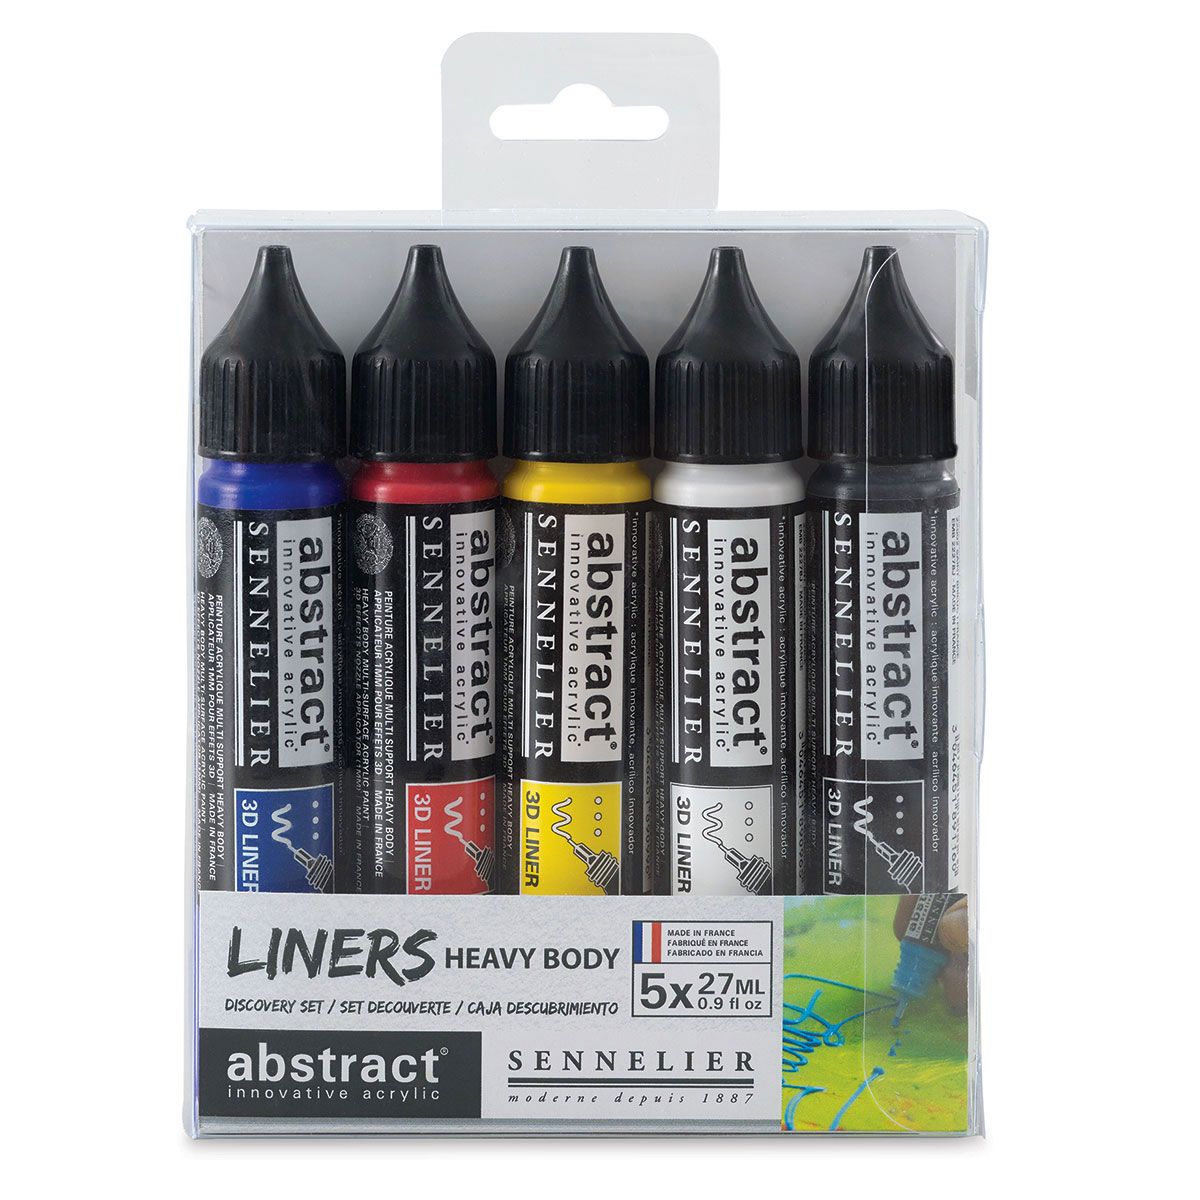 Sennelier Abstract 3D Liner Discovery Primary Colour Set of 5